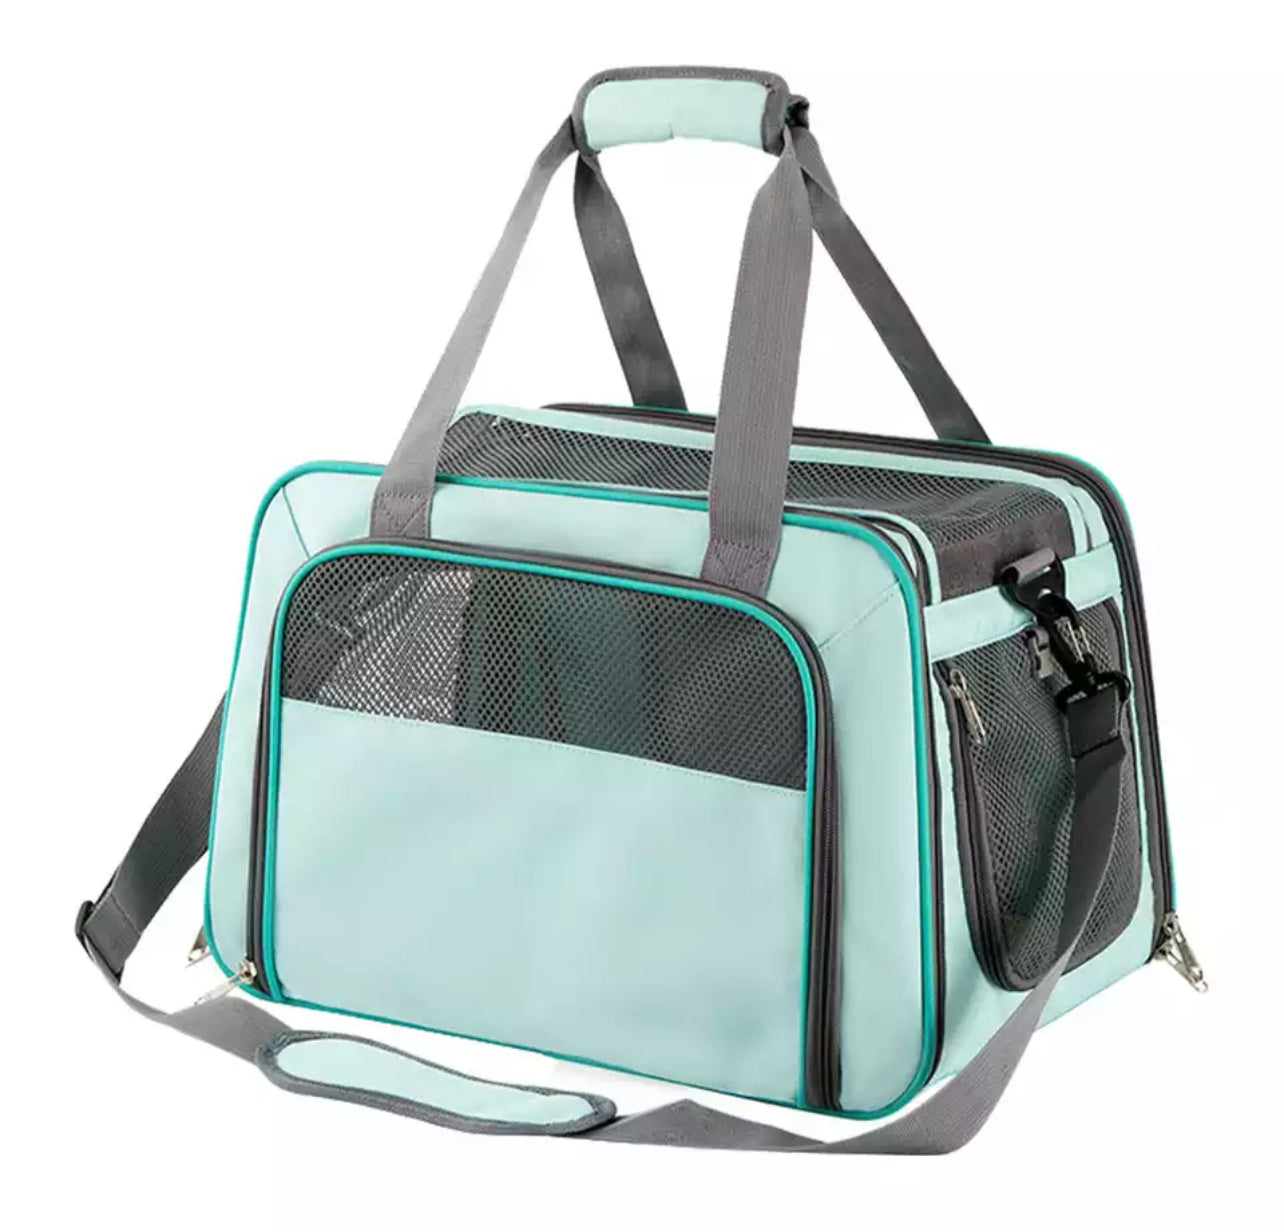 Soft-sided Pet Travel Carrier - Turquoise